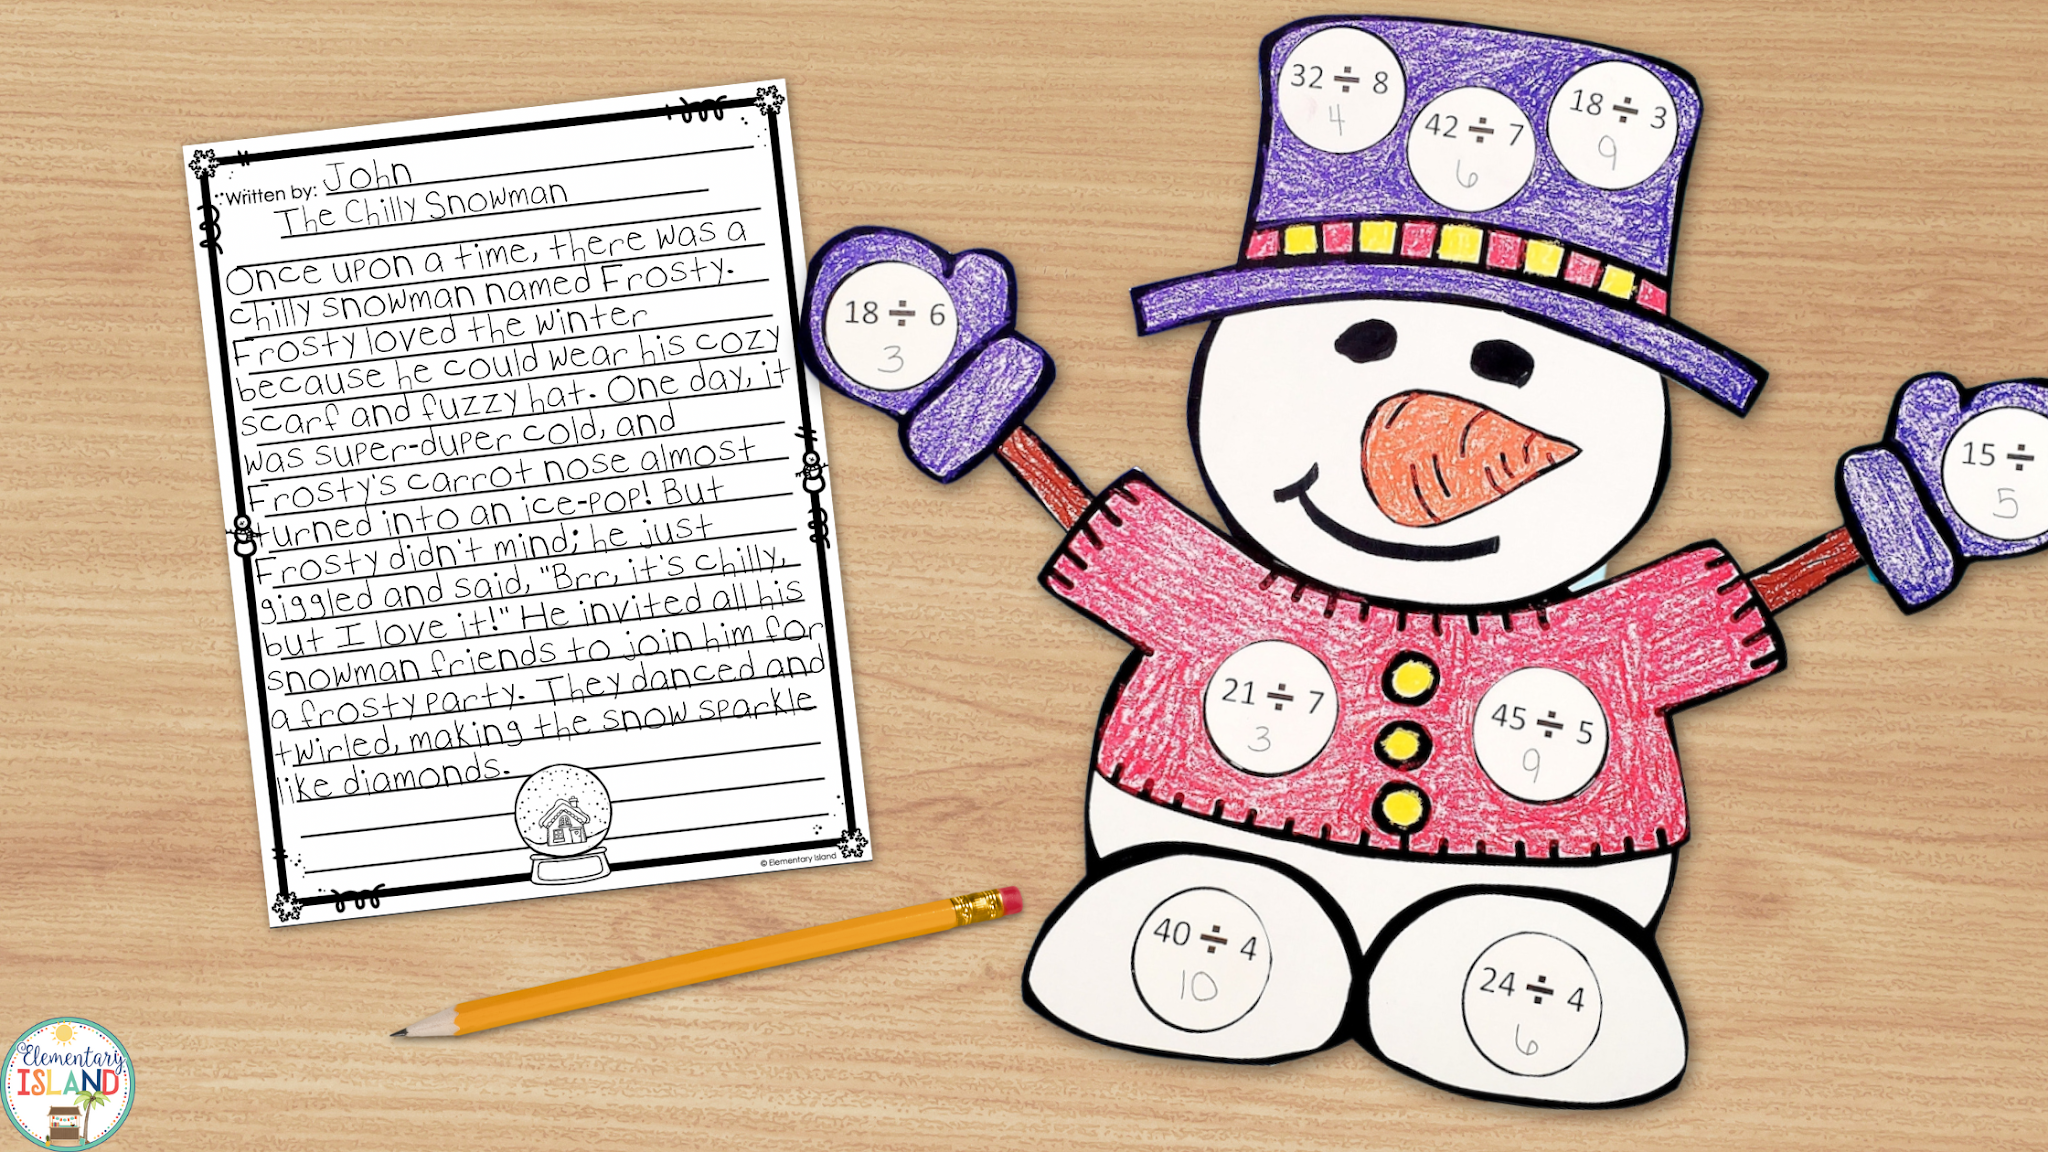 Incorporate your ELA standards into this math craftivity with a fun writing activity.